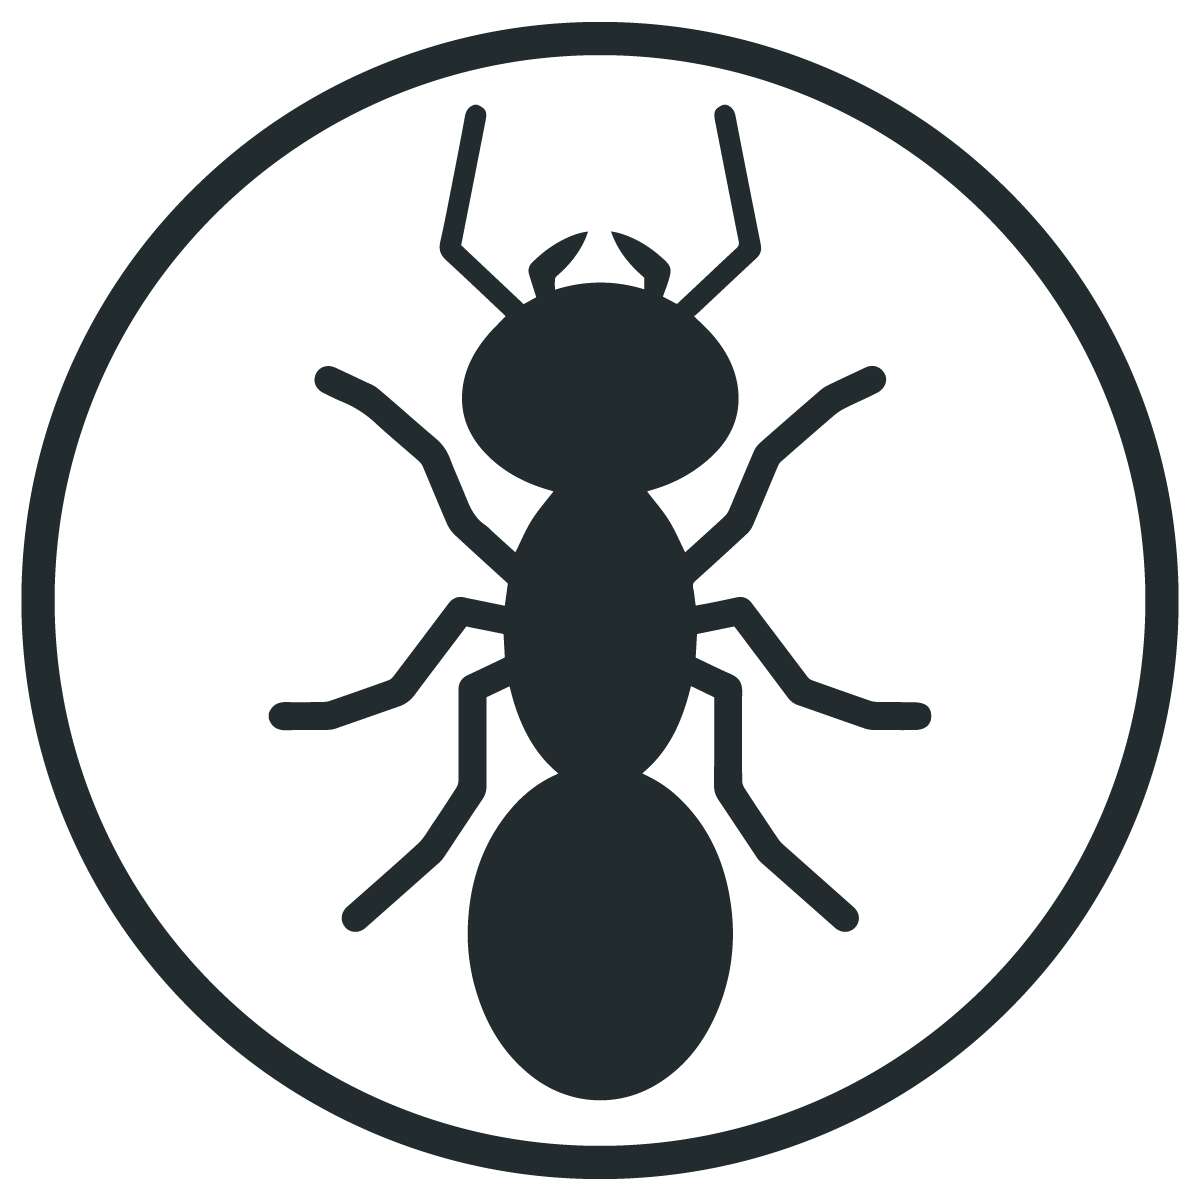 Ant service in sydney for homes and businesses